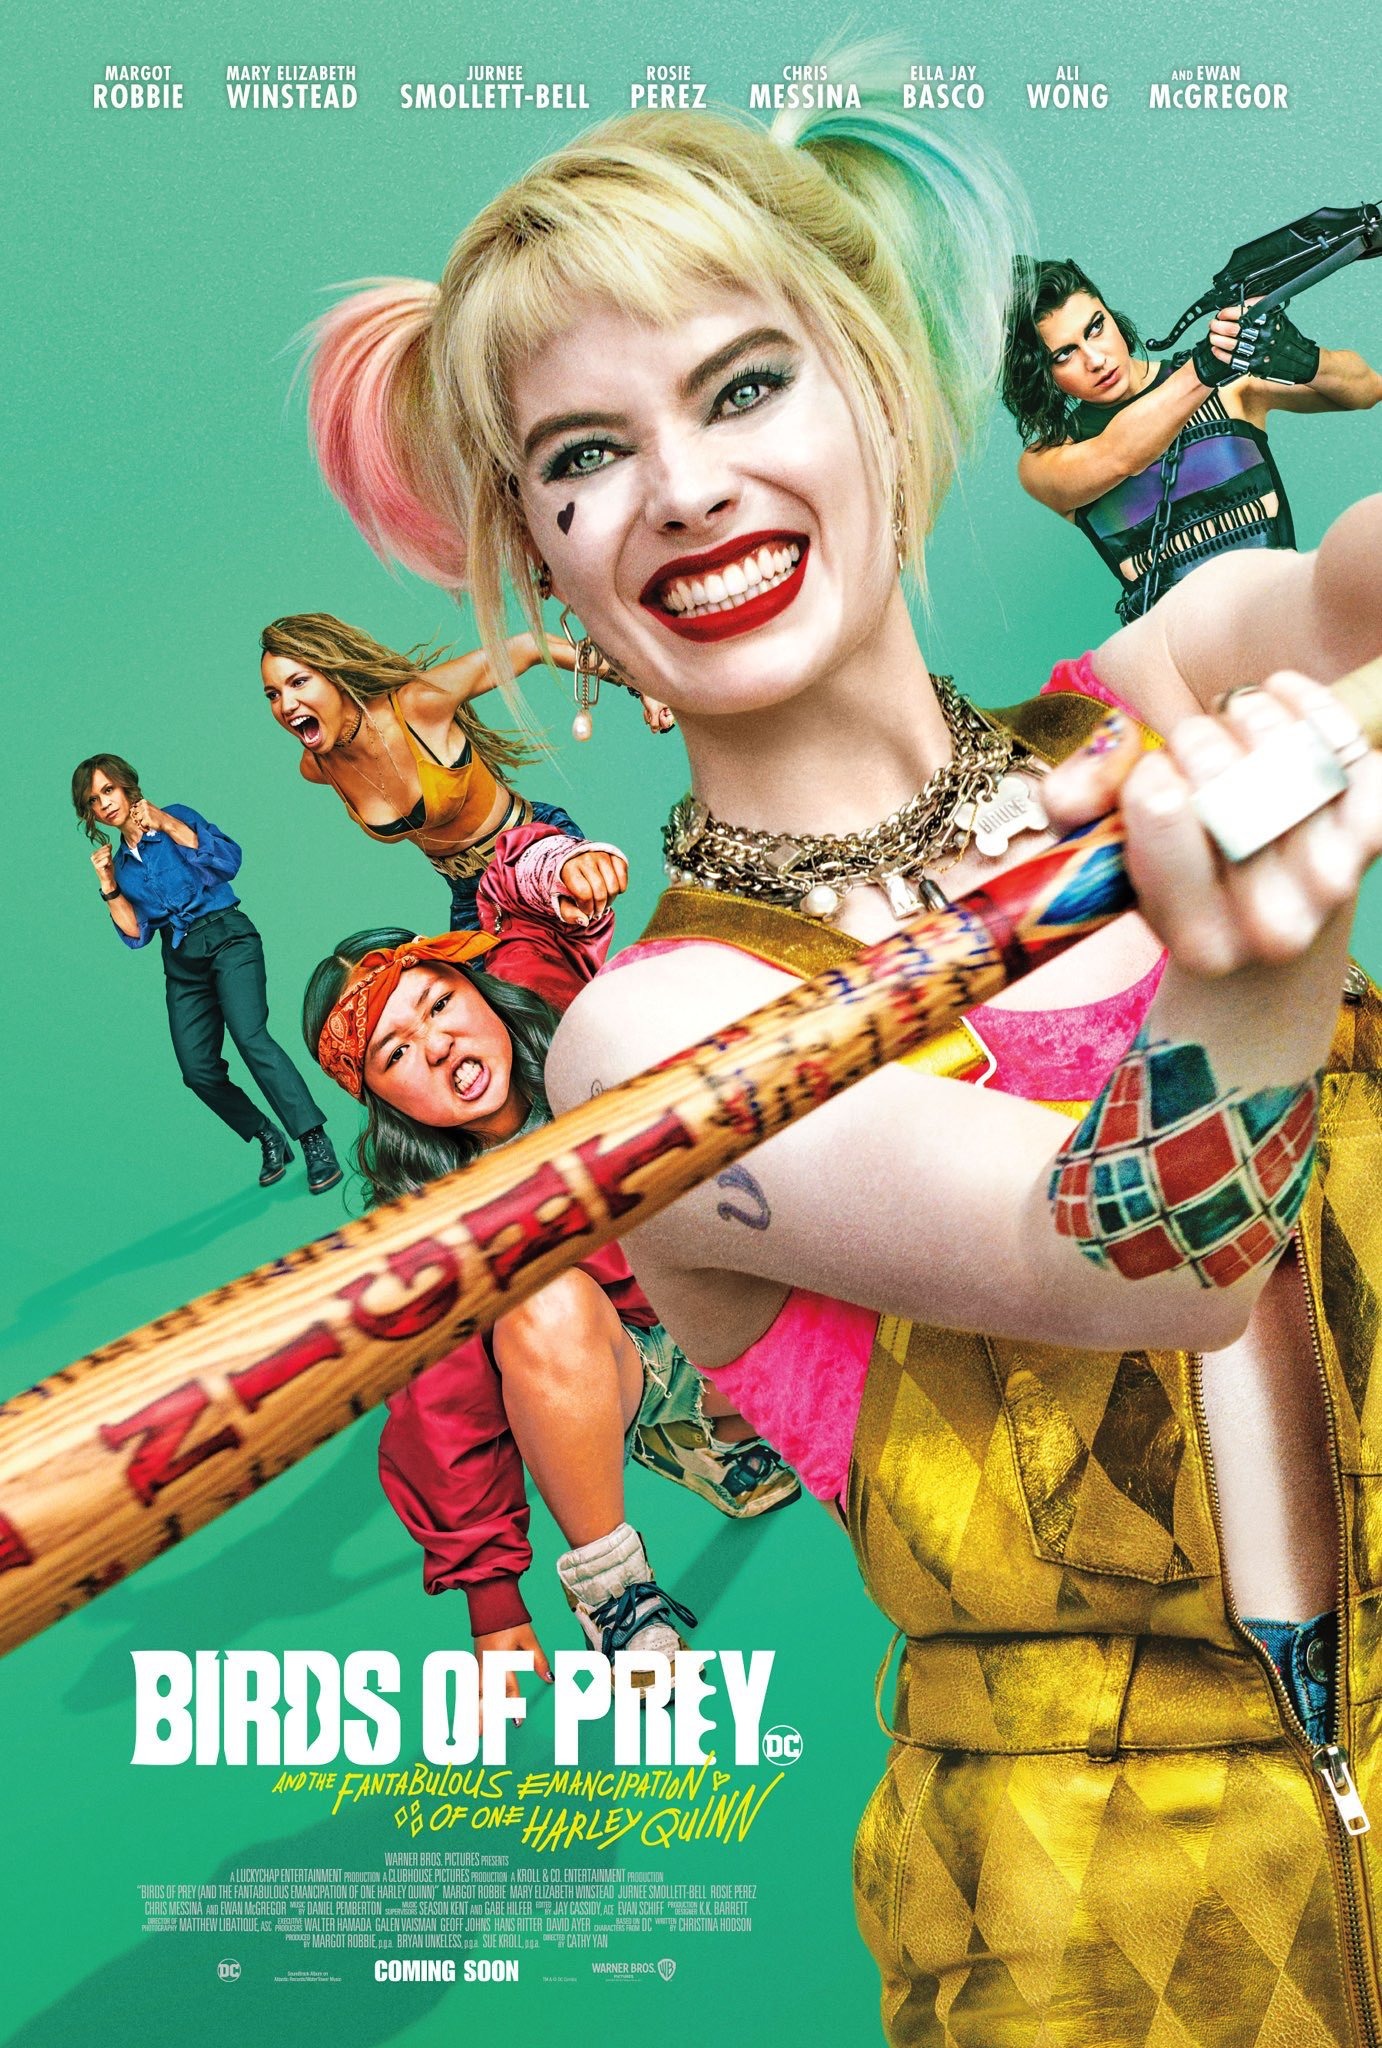 Mega Sized Movie Poster Image for Birds of Prey (And the Fantabulous Emancipation of One Harley Quinn) (#16 of 18)